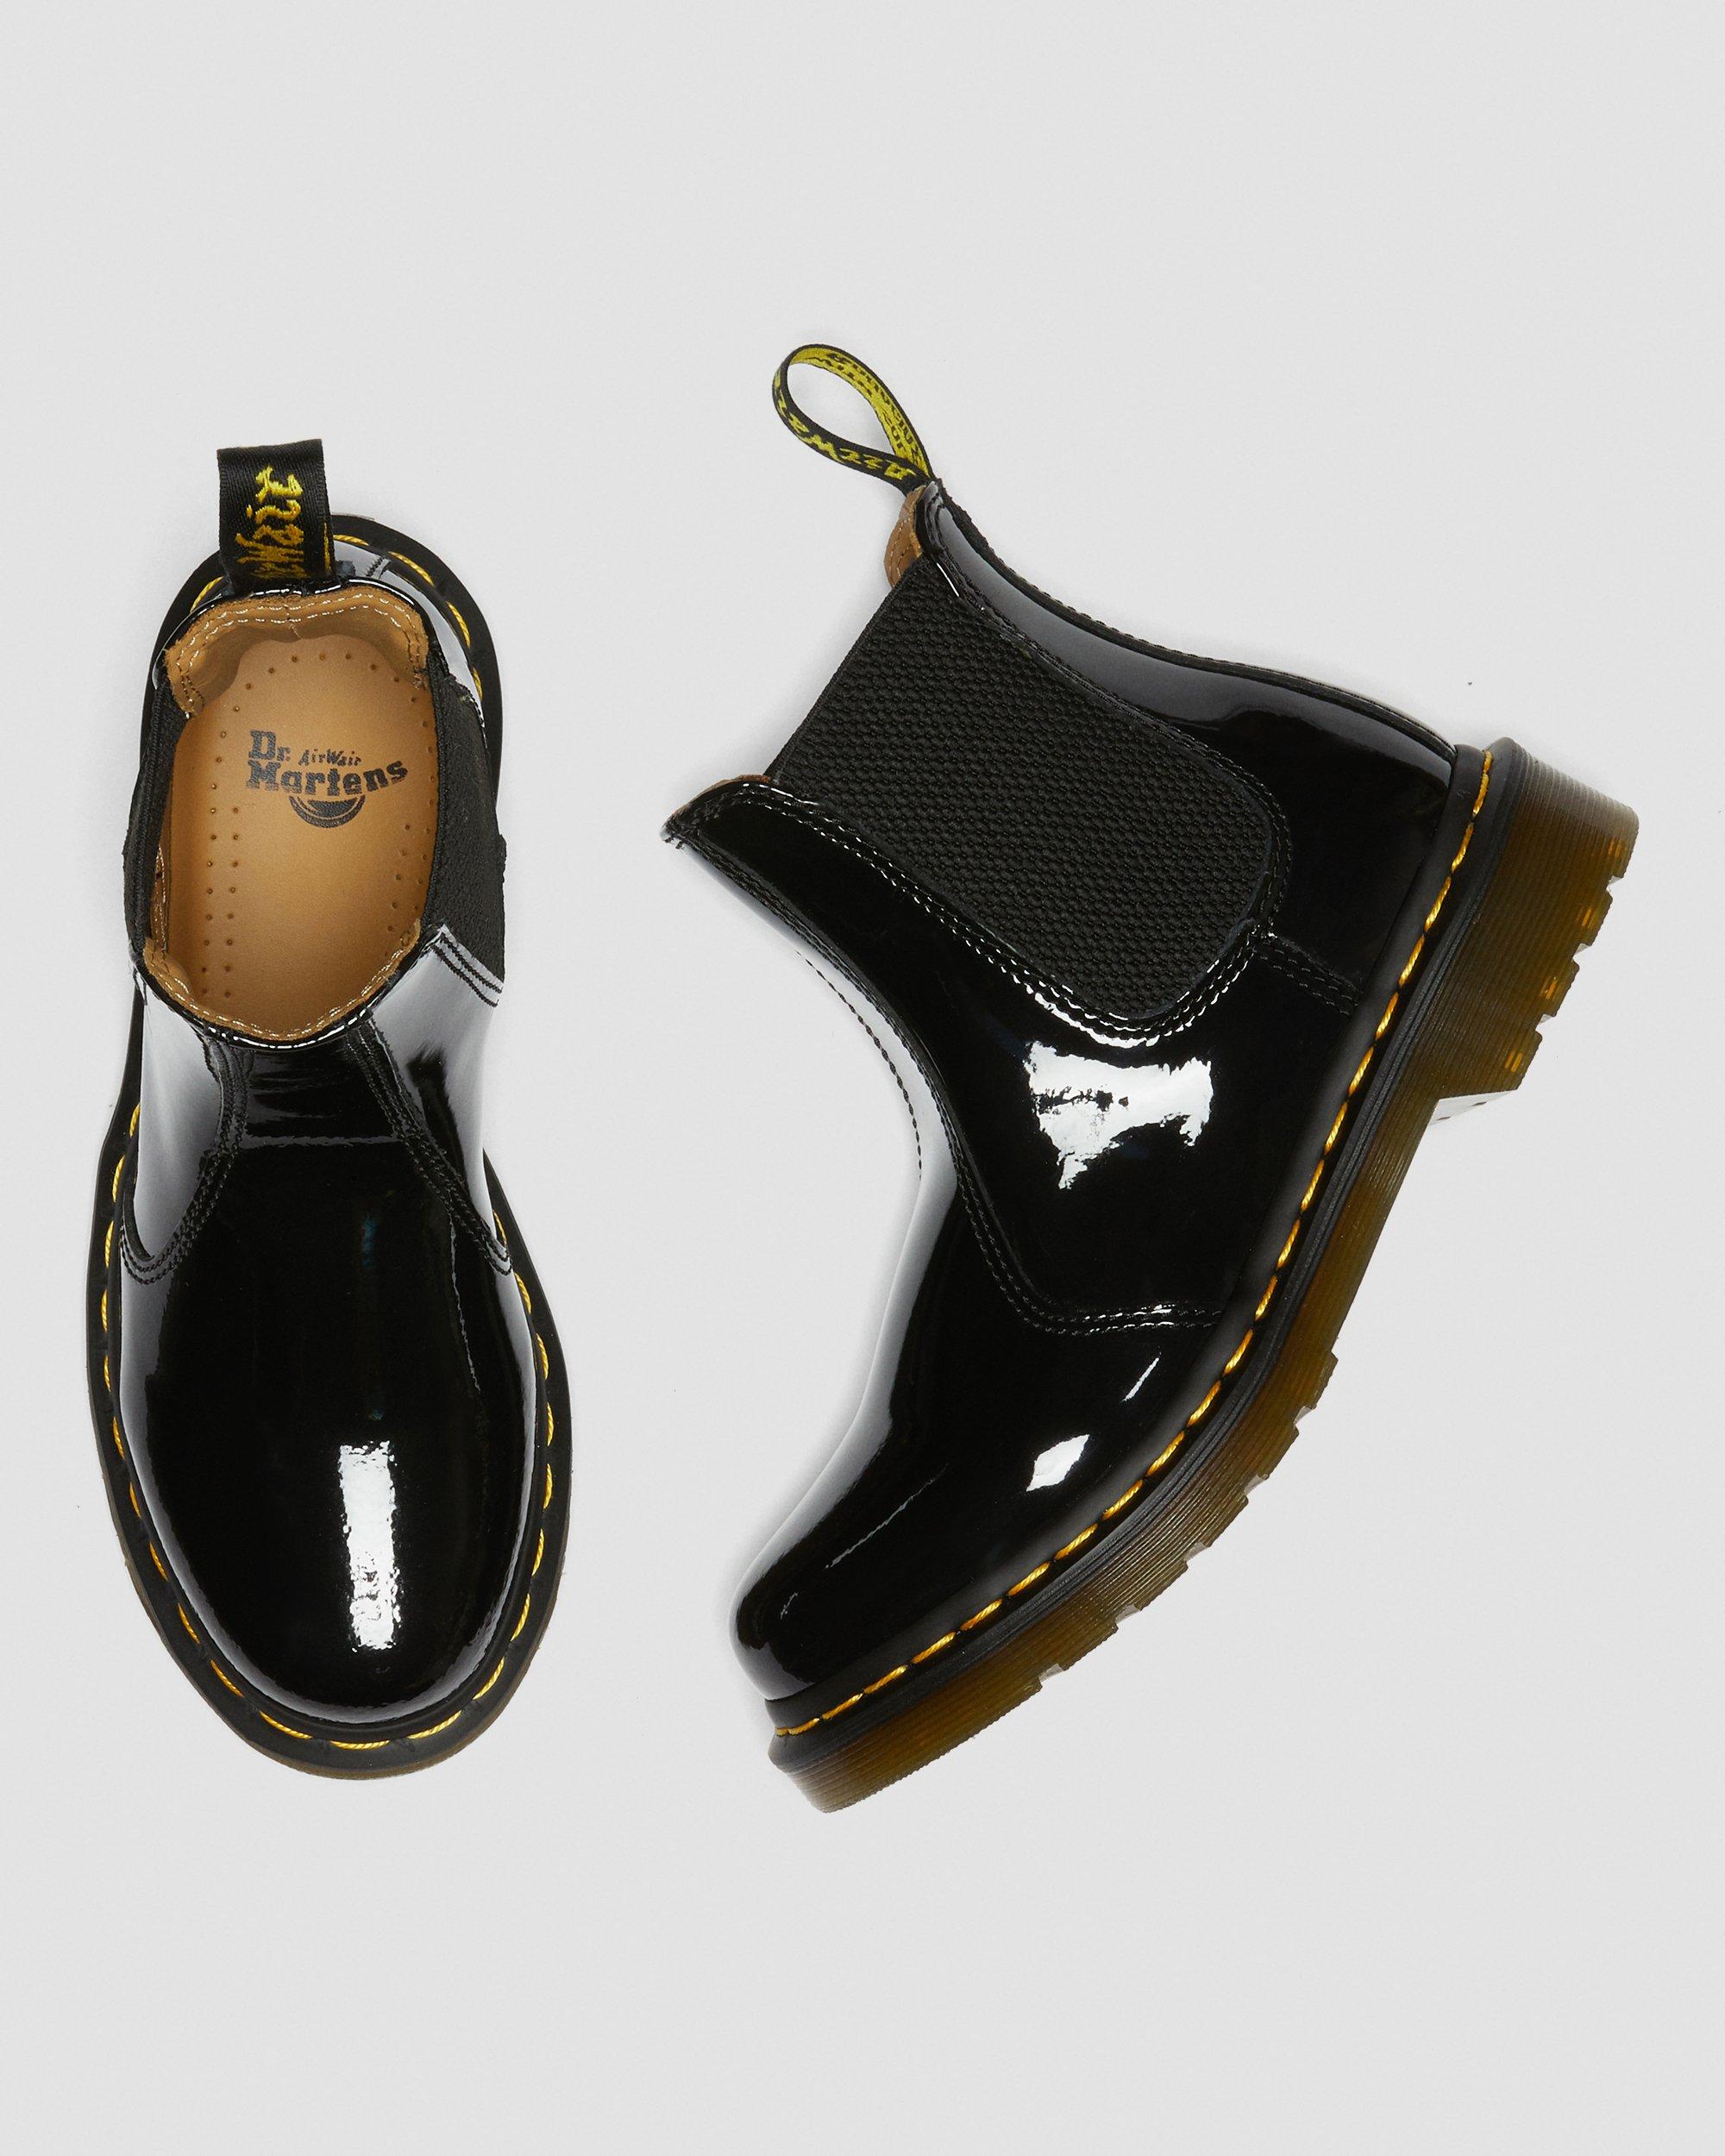 Women's Leather Boots | Dr. Martens